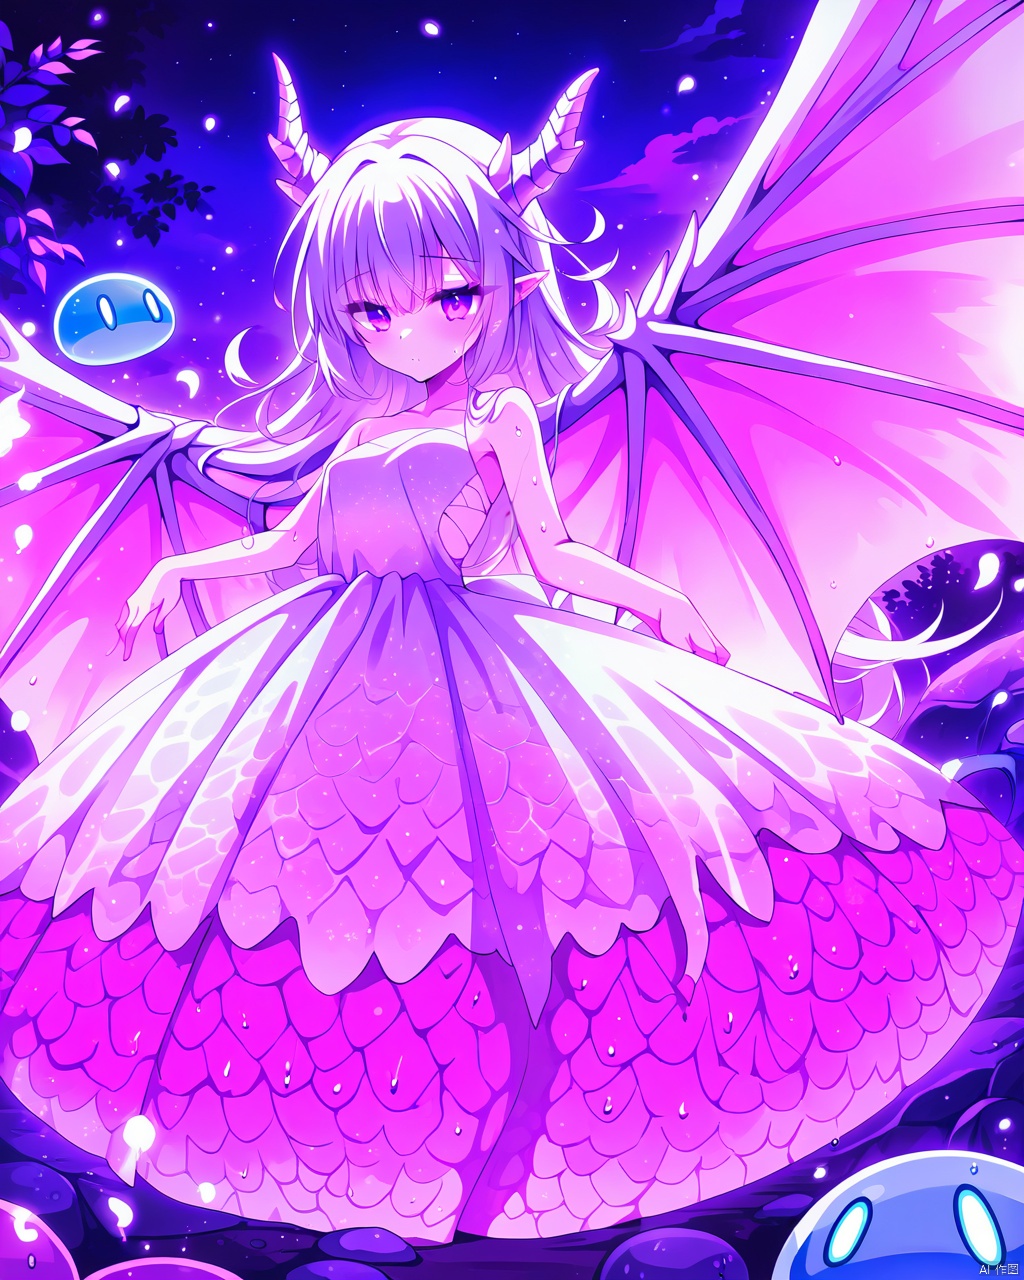 masterpiece, best quality, (Anime:1.4), pastel anime dragon girl, slime, wet look, shimmering lights, dragon in background, whirls of vapor, iridescent textures, dragon scales, dragon horns, dragon wings, translucent scales, soft neon pink light, ethereal ambiance, delicate details, magical atmosphere  